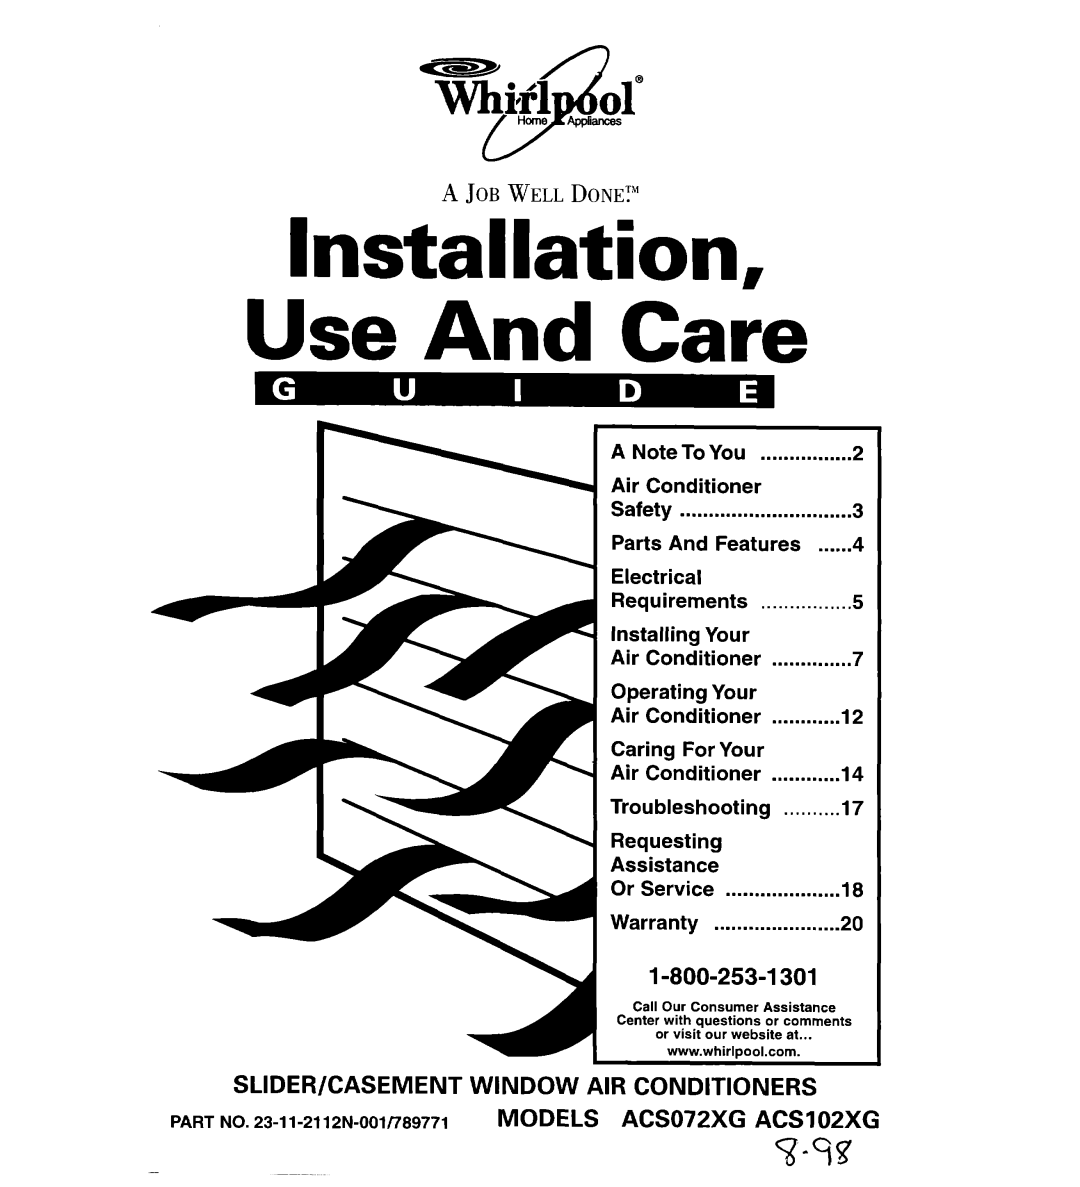 Whirlpool ACS102XG, ACS072XG warranty Installation Use And Care, Slider/Casement Window Air Conditioners 